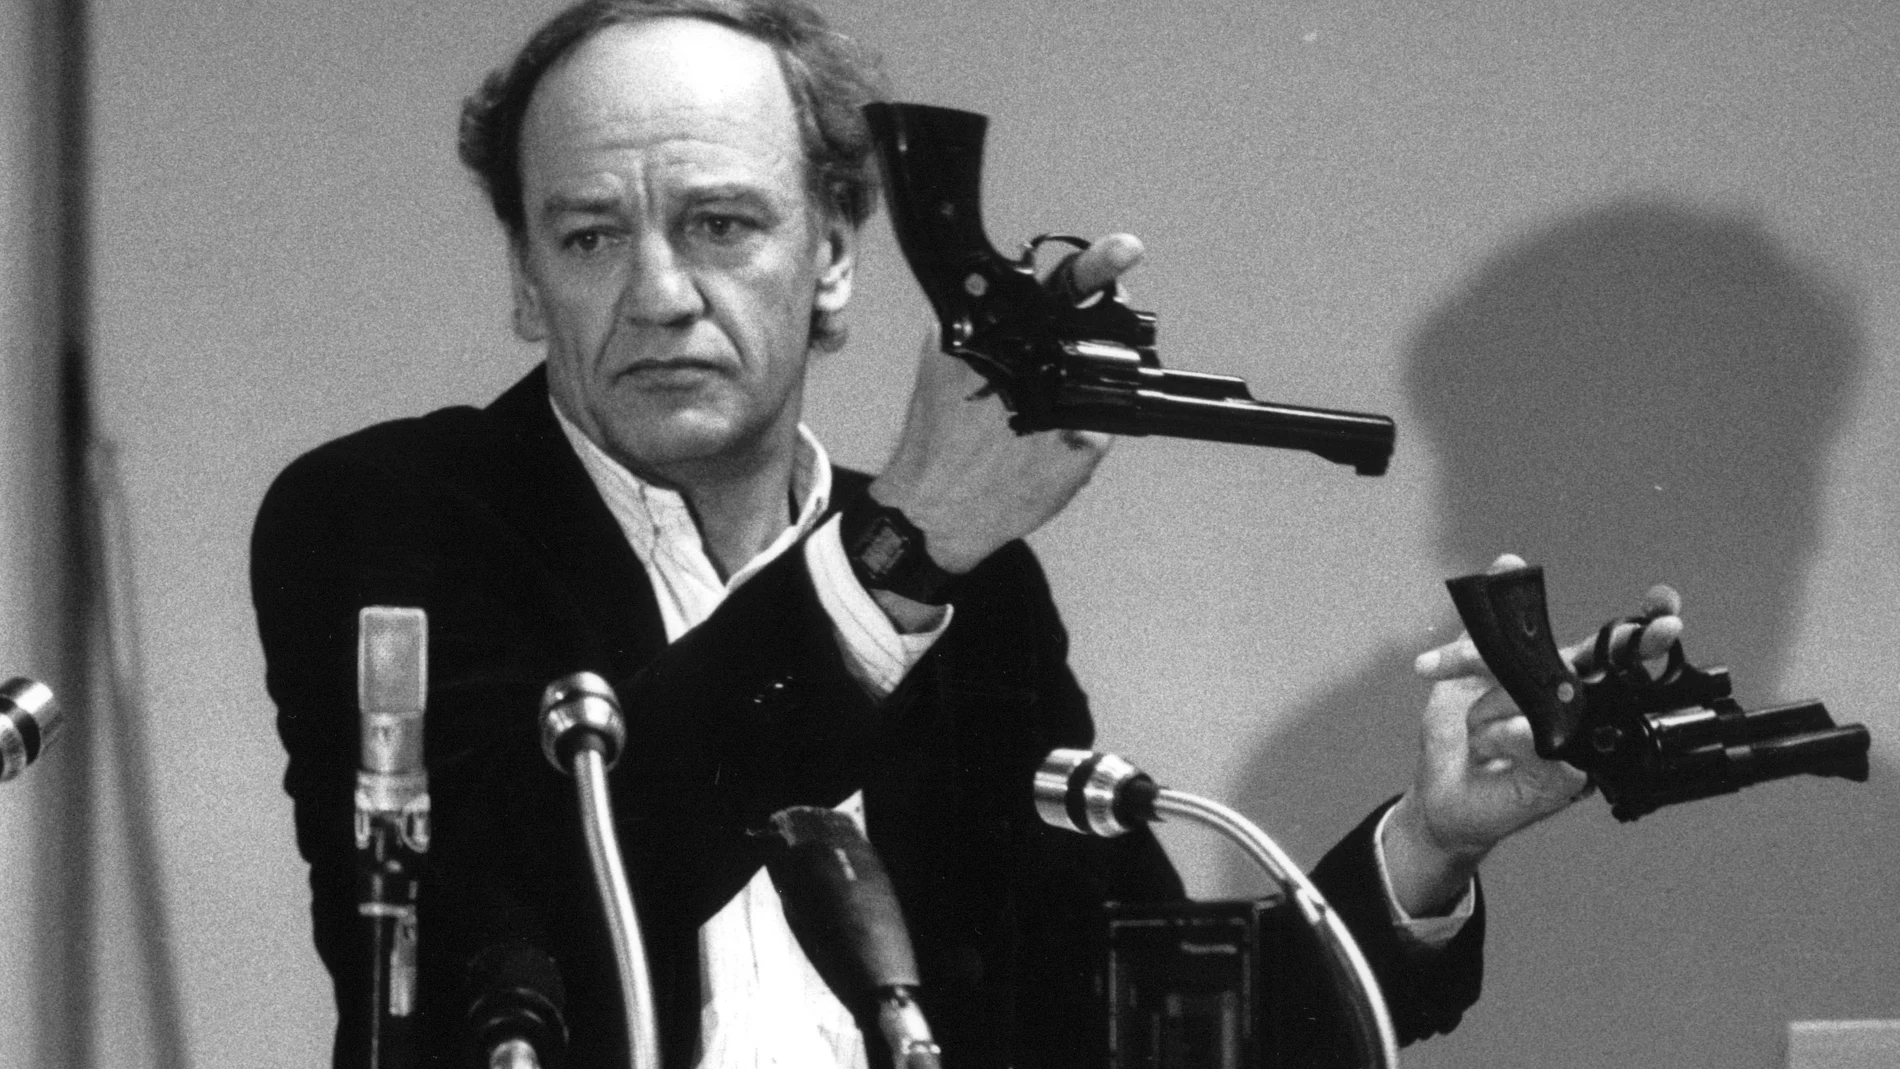 Hans Holmer, head of the investigation of the assassination of Olof Palme, shows two Smith & Wesson .357 Magnum revolvers during a press conference in Stockholm